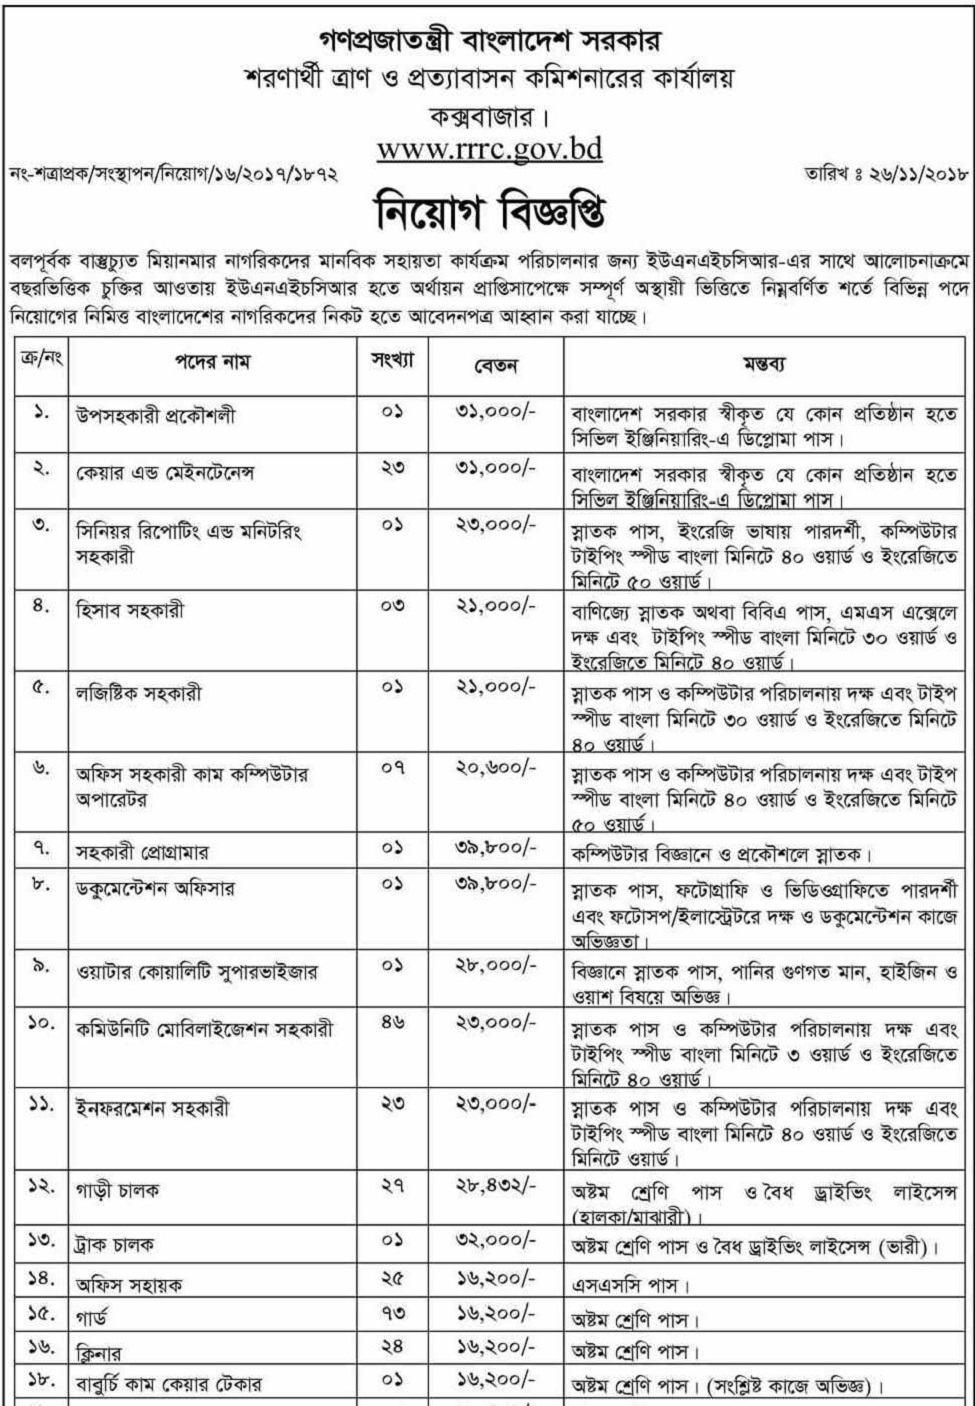 Refugee Relief and Repatriation Commissioners Office Job Circular 2018 